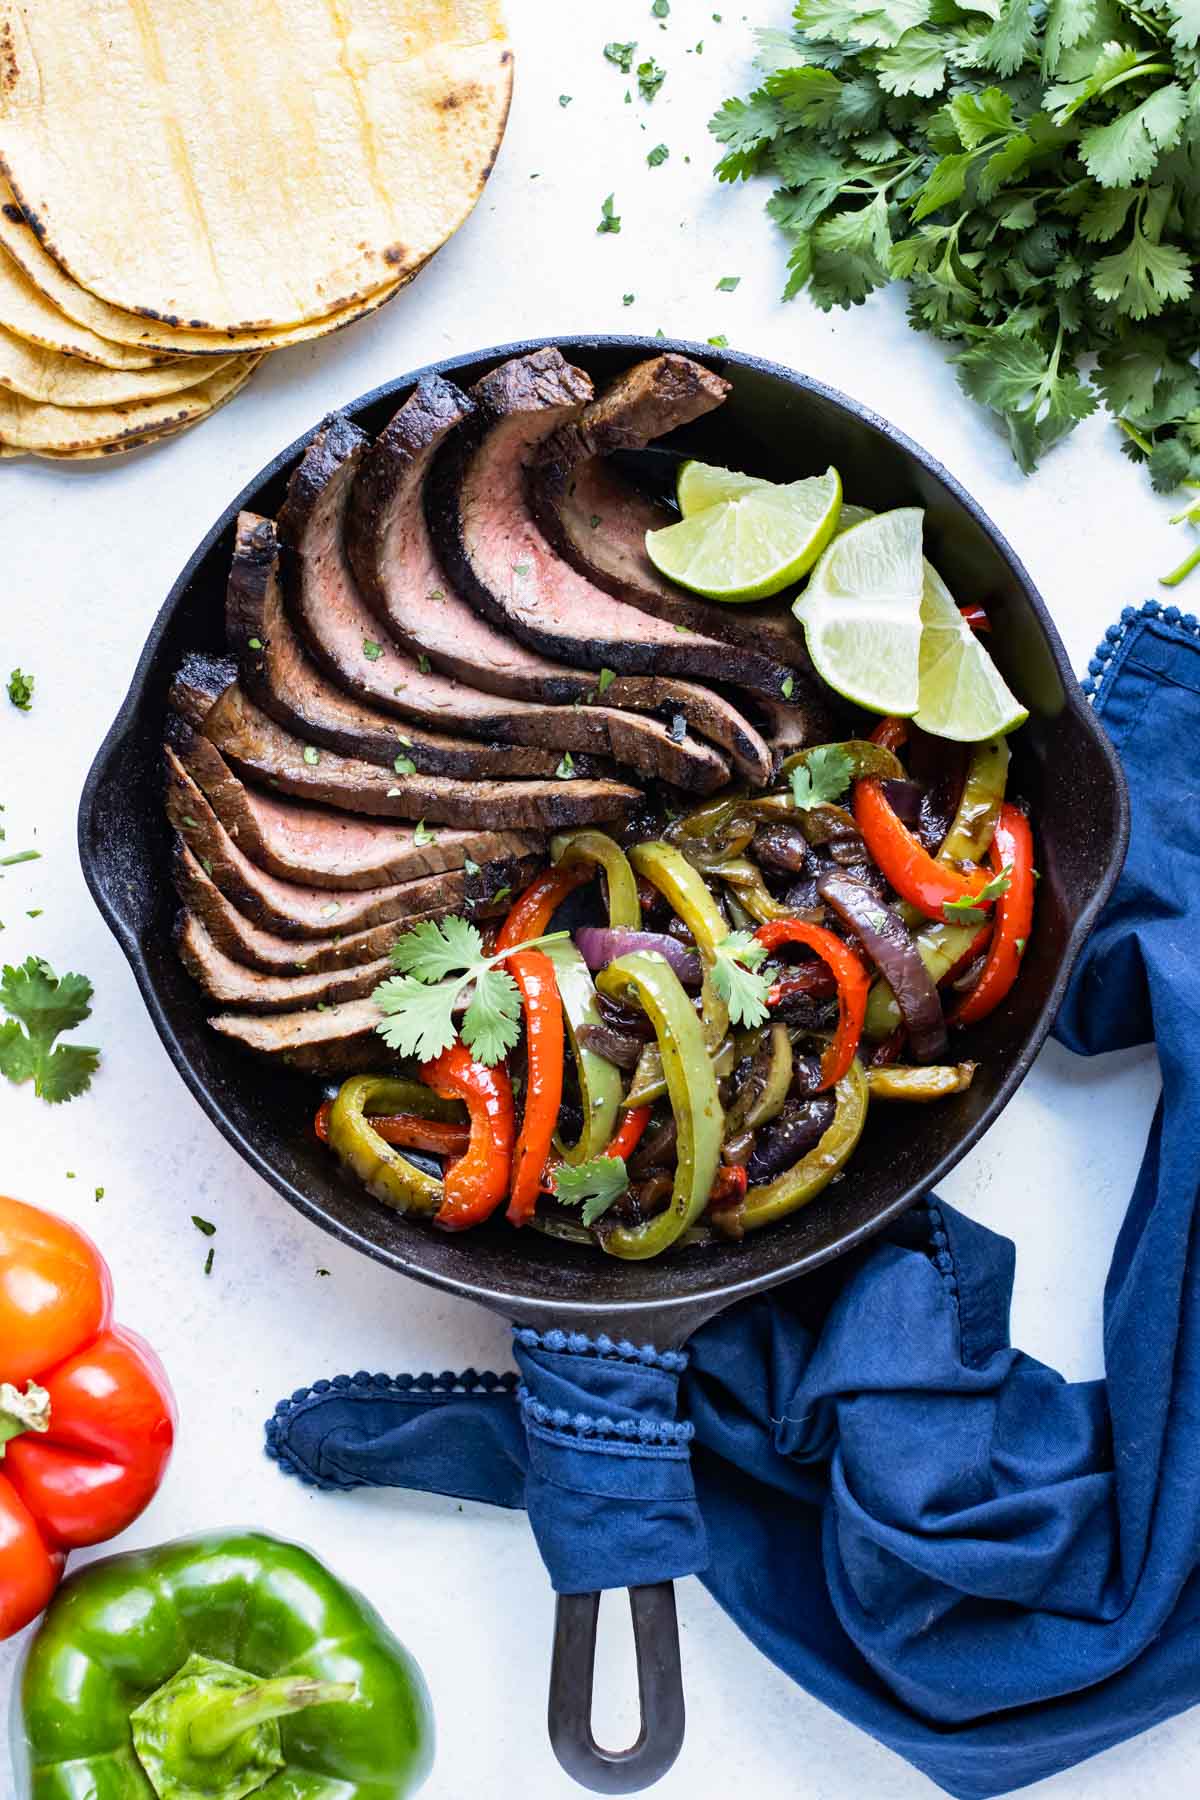 Best Flank Steak Fajitas RECIPE served in a cast iron skillet with limes and sauteed bell peppers.